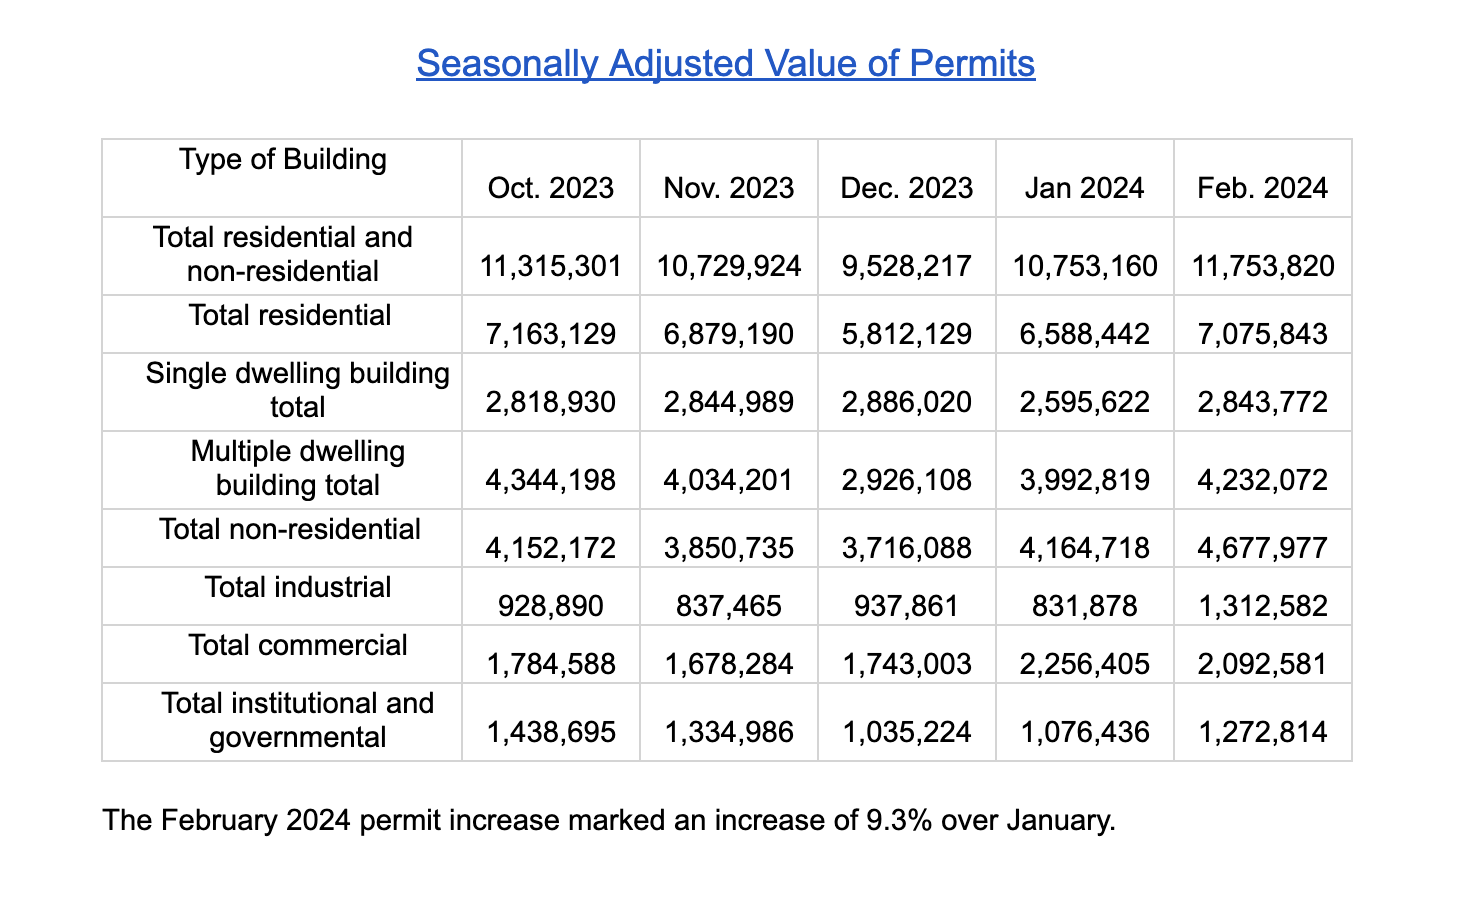 Table showing Canada-wide, seasonally adjusted value of building permits by type, including total residential, single dwelling, multiple dwelling, total non-residential, and total, for months Oct 2023 to